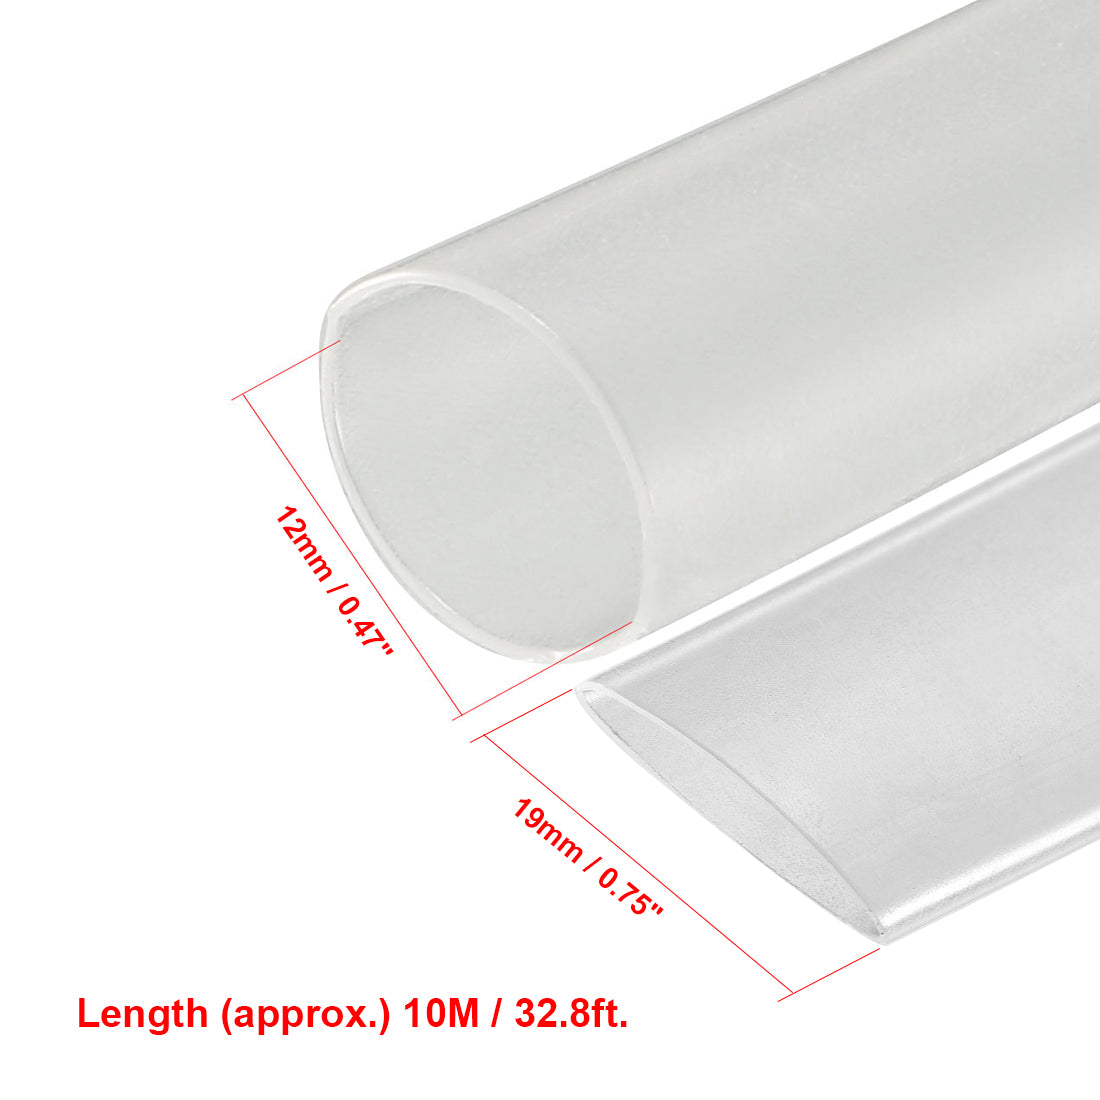 uxcell Uxcell Heat Shrink Tube 2:1 Electrical Insulation Tube Wire Cable Tubing Sleeving Wrap Clear 12mm Diameter 10m Long